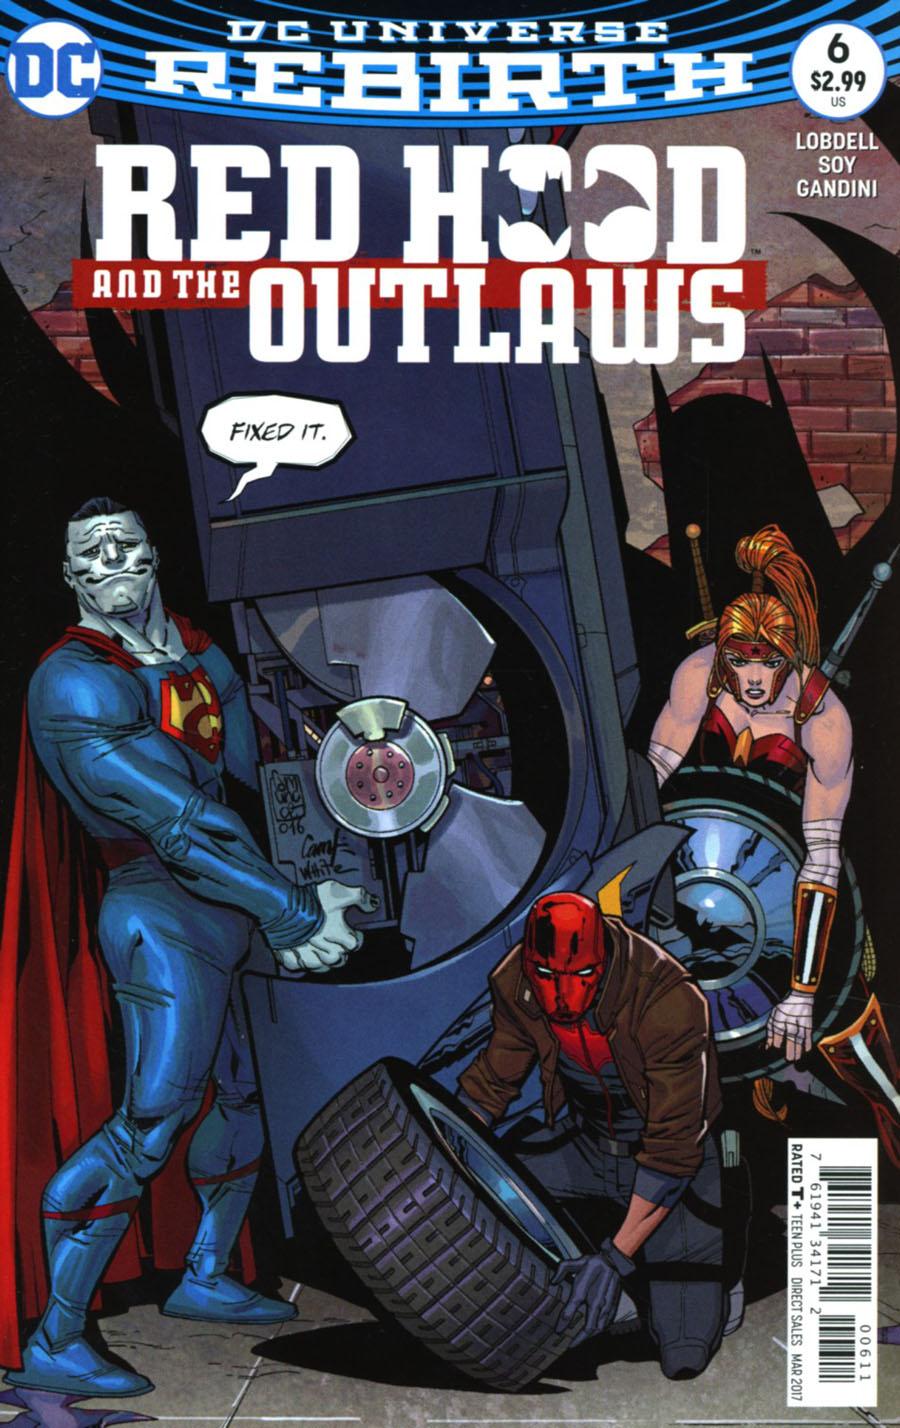 Red Hood & The Outlaws #6